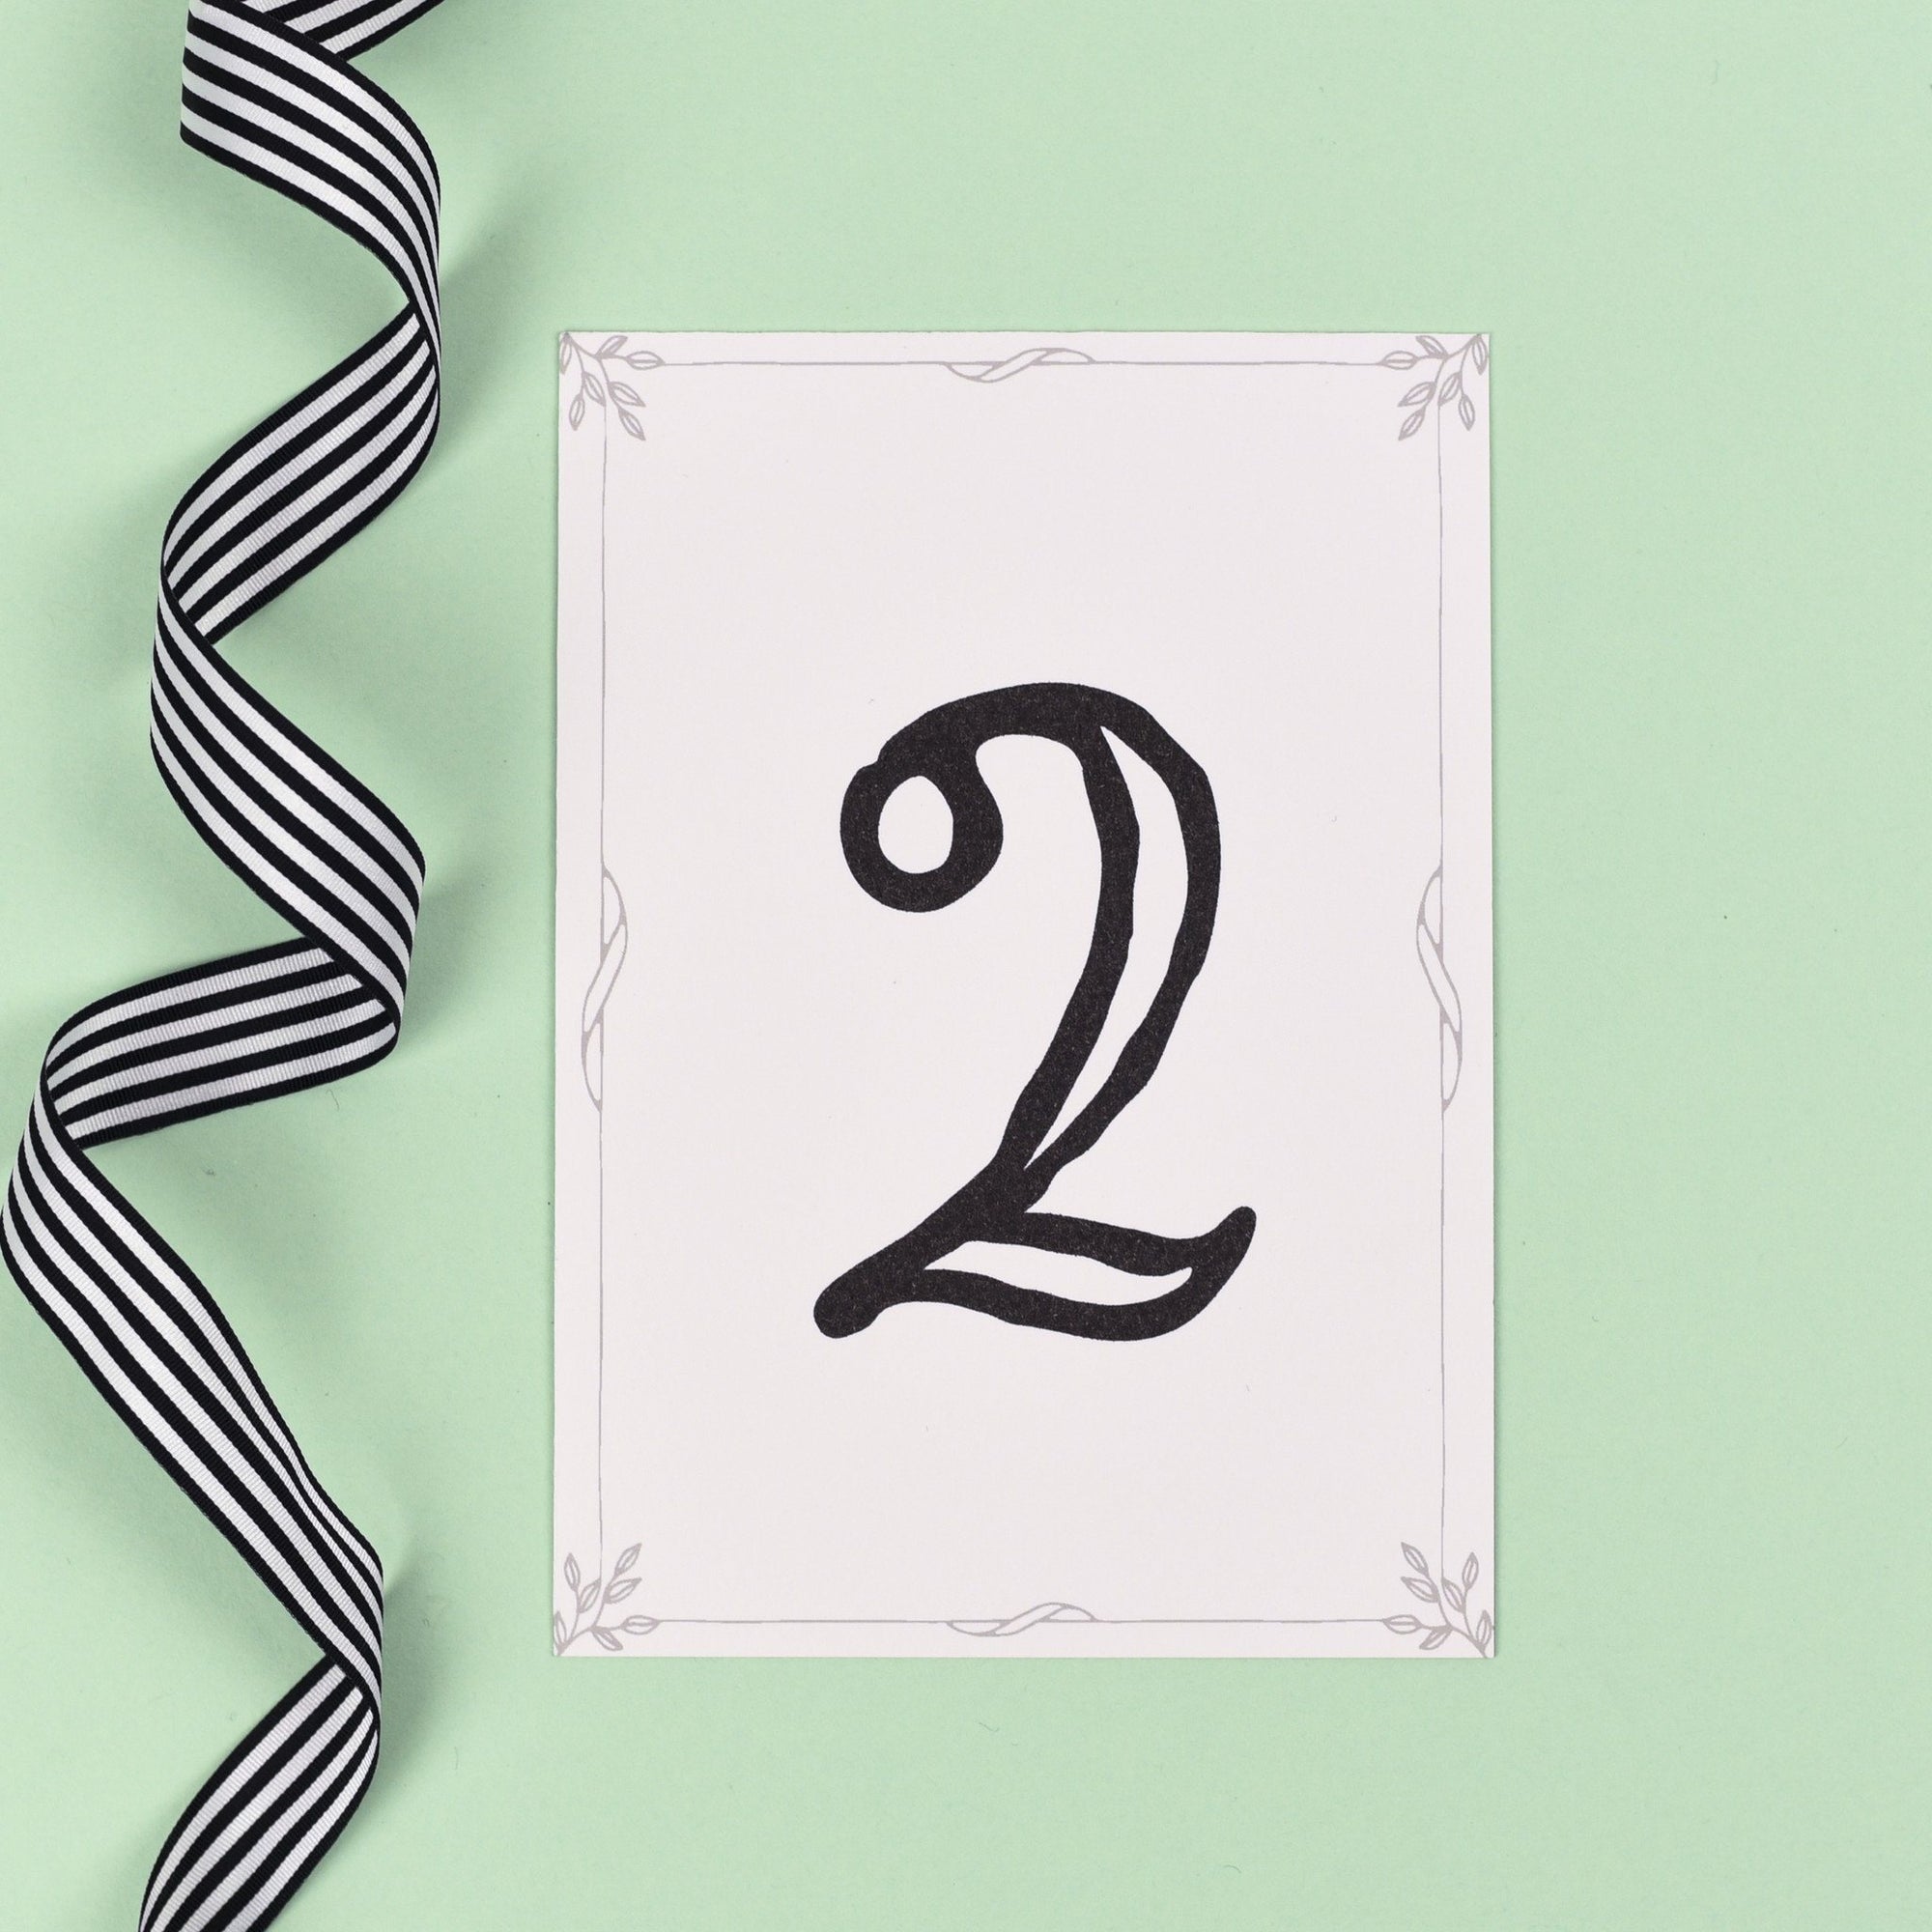 Table Names or Numbers - Alexa - Monochrome Silhouette Garden 